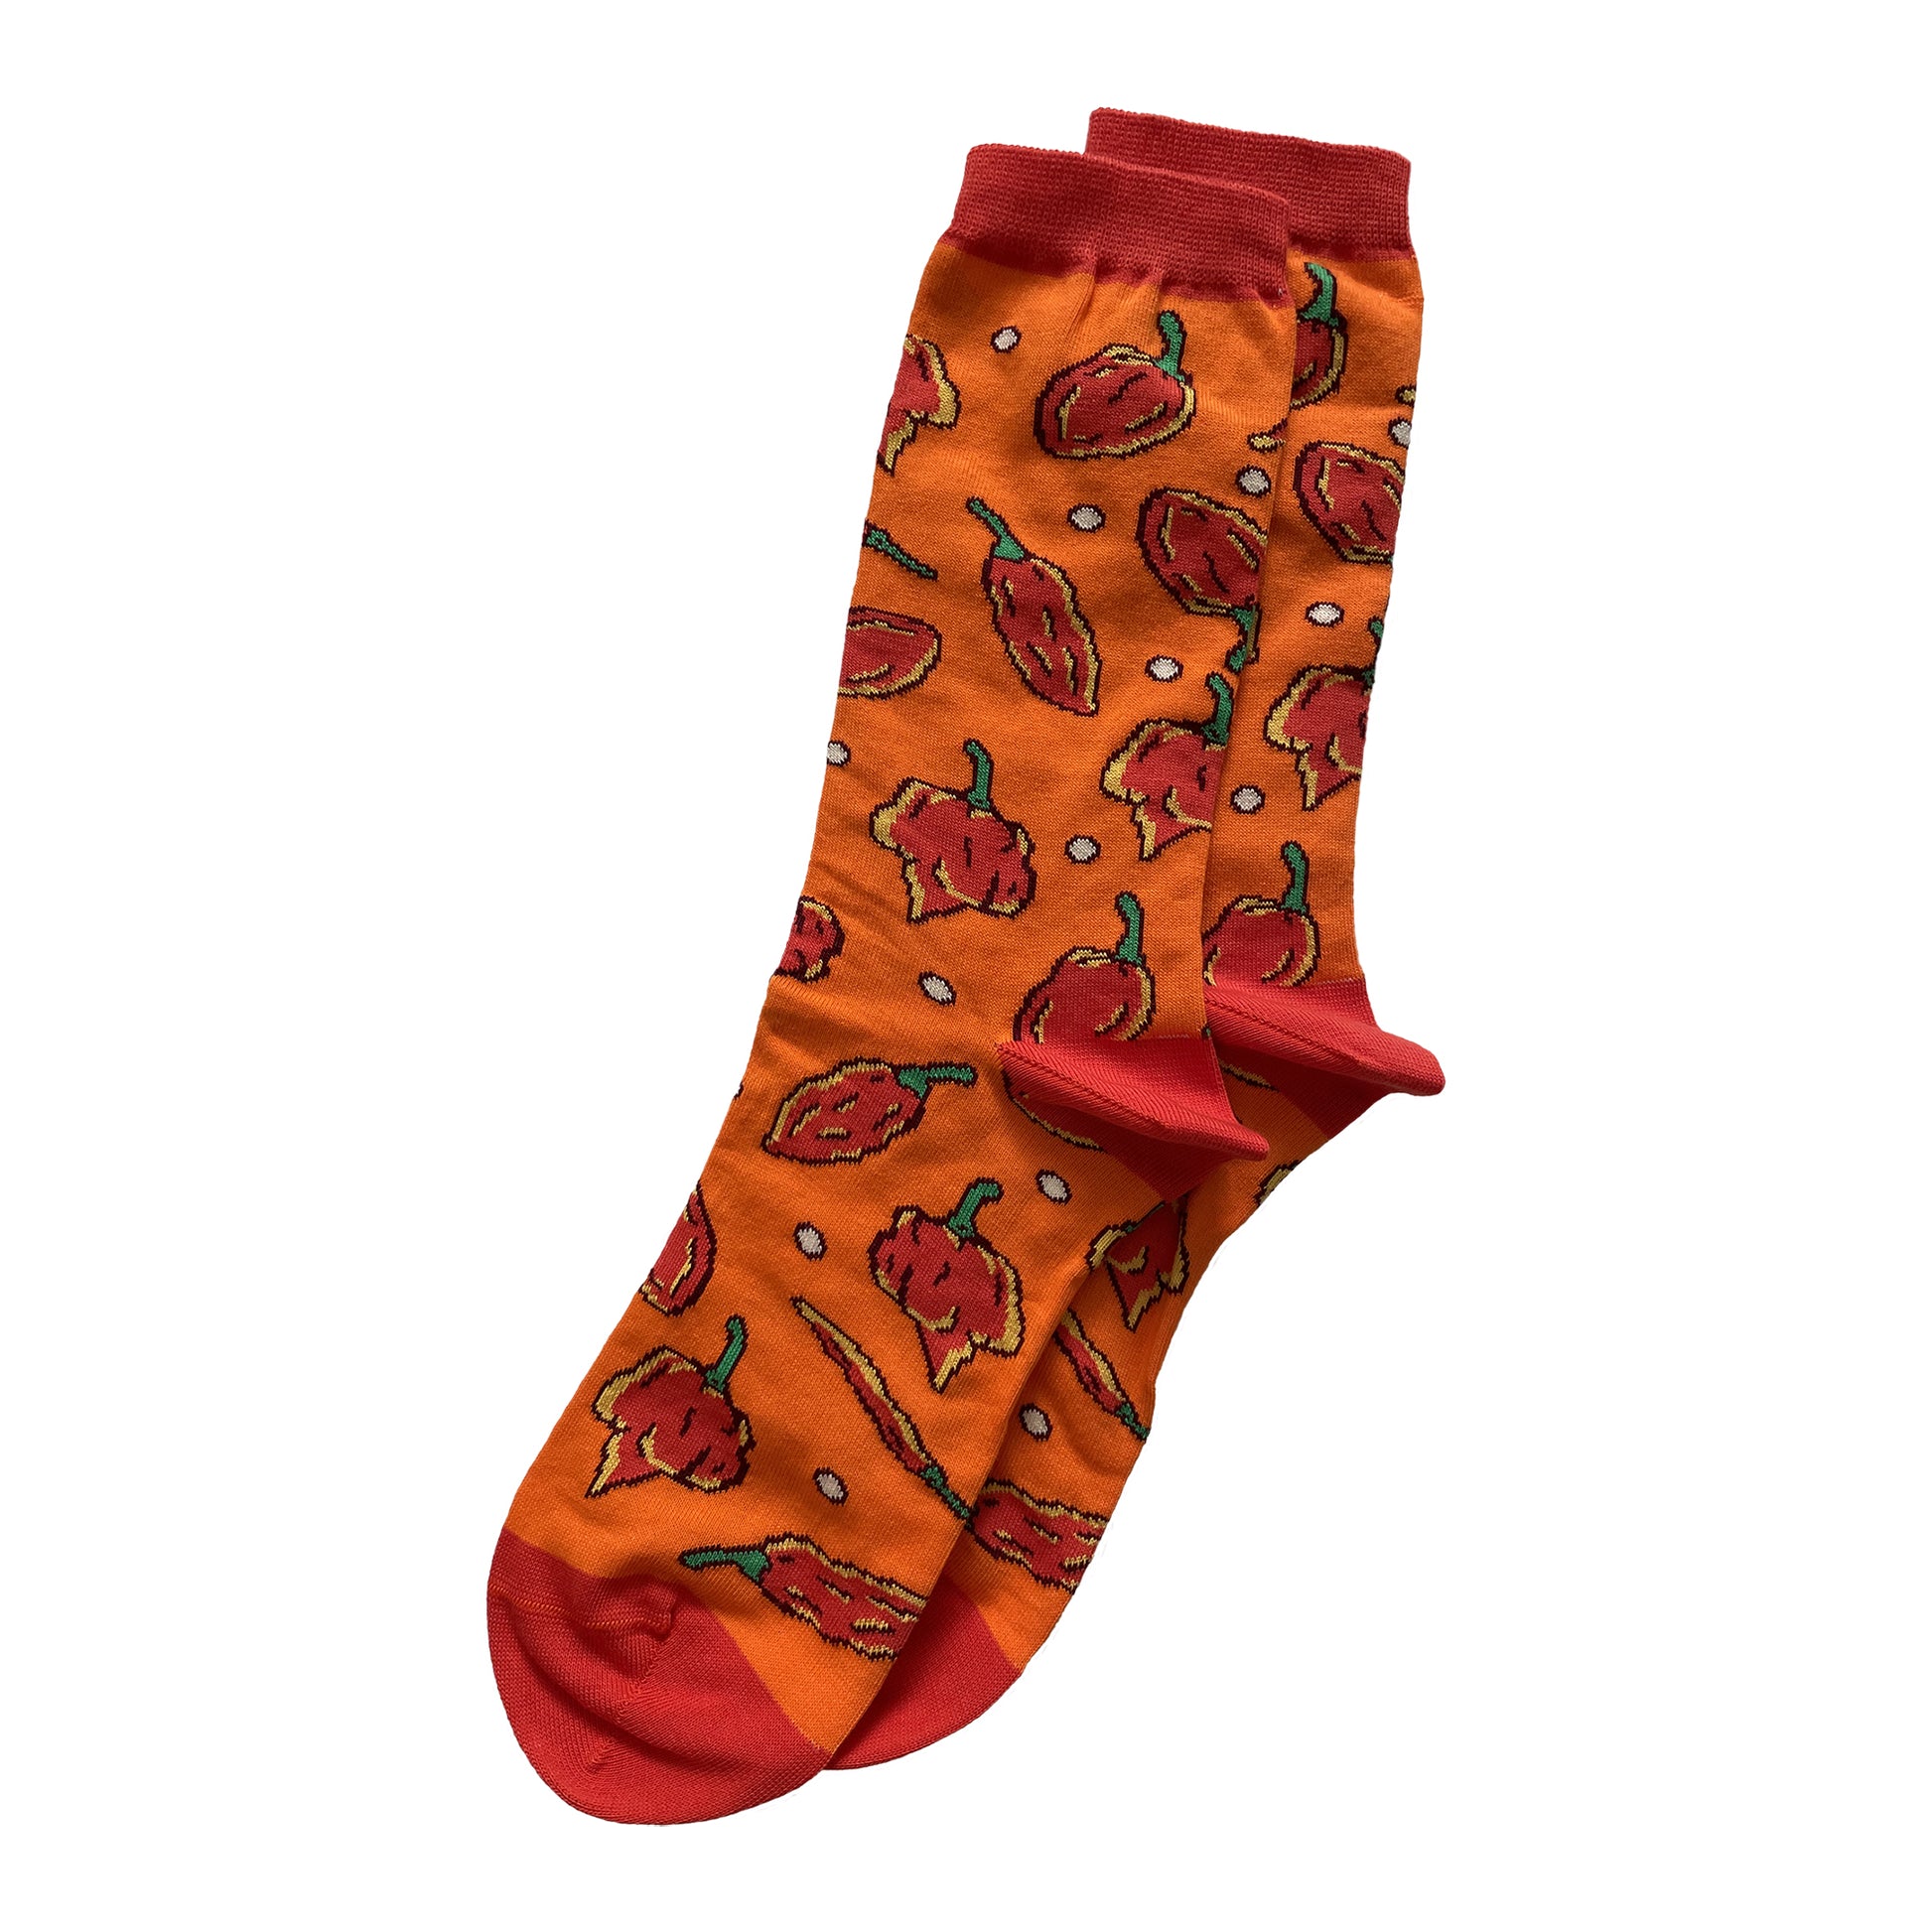 A pair of orange socks is patterned with red hot peppers and has red cuffs, heels and toes.